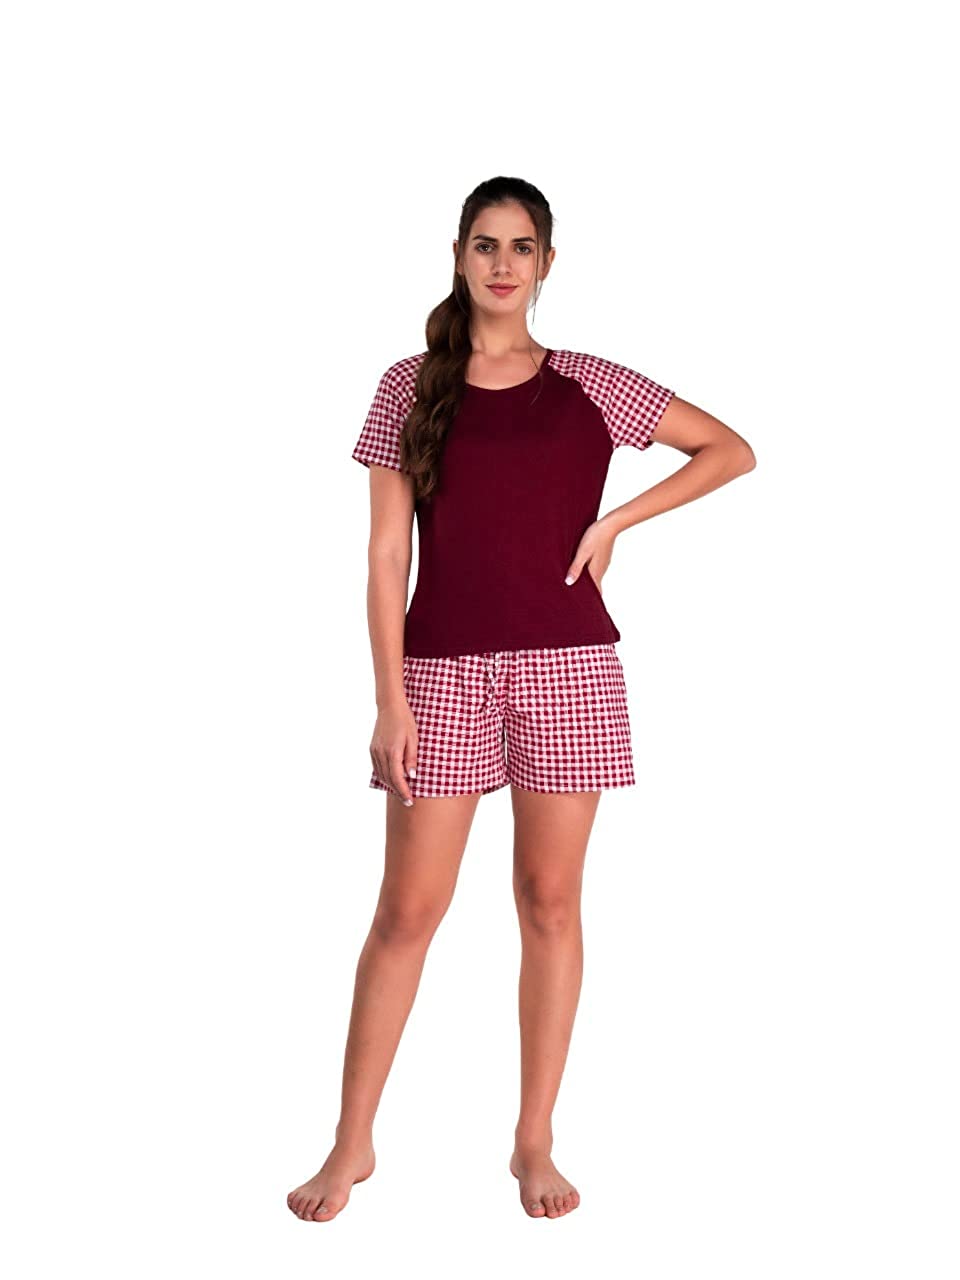 Evolove Womens 100% Cotton Tops or Tshirts & Shorts Set Elastic Waistband with 2 Side Pockets Round Neck Half Sleeve Checks Printed Super Soft Regular Night Suit Sleep Wear (S to 2XL Size)